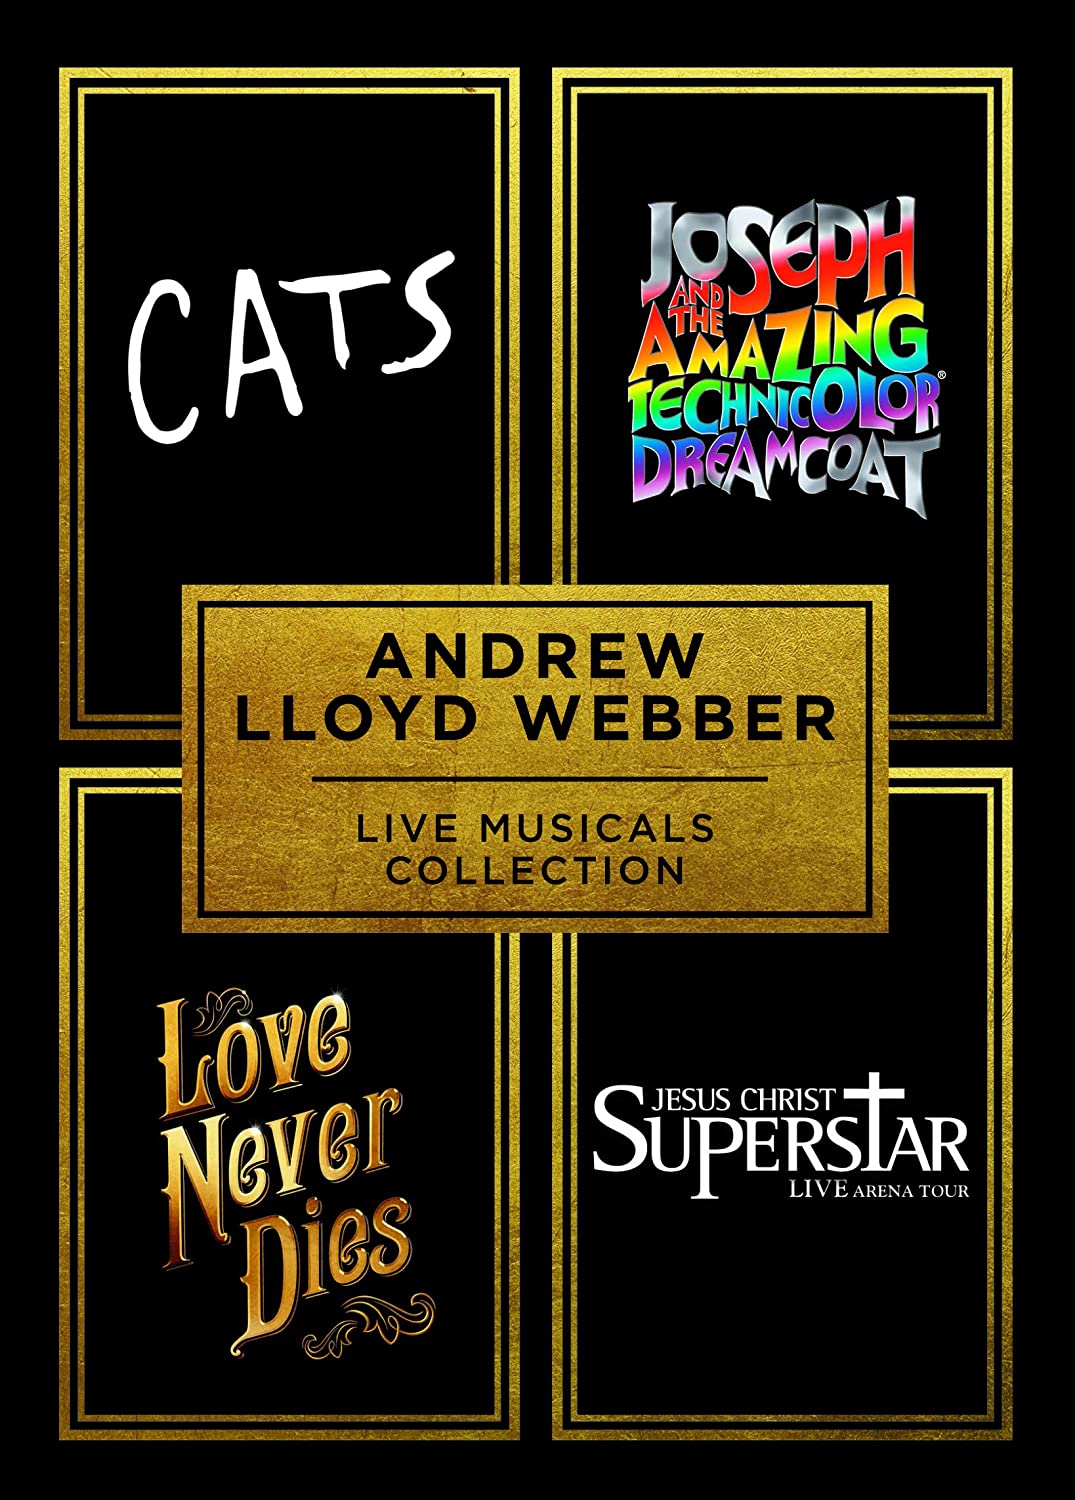 Andrew Lloyd Webber - Live Musicals Collection